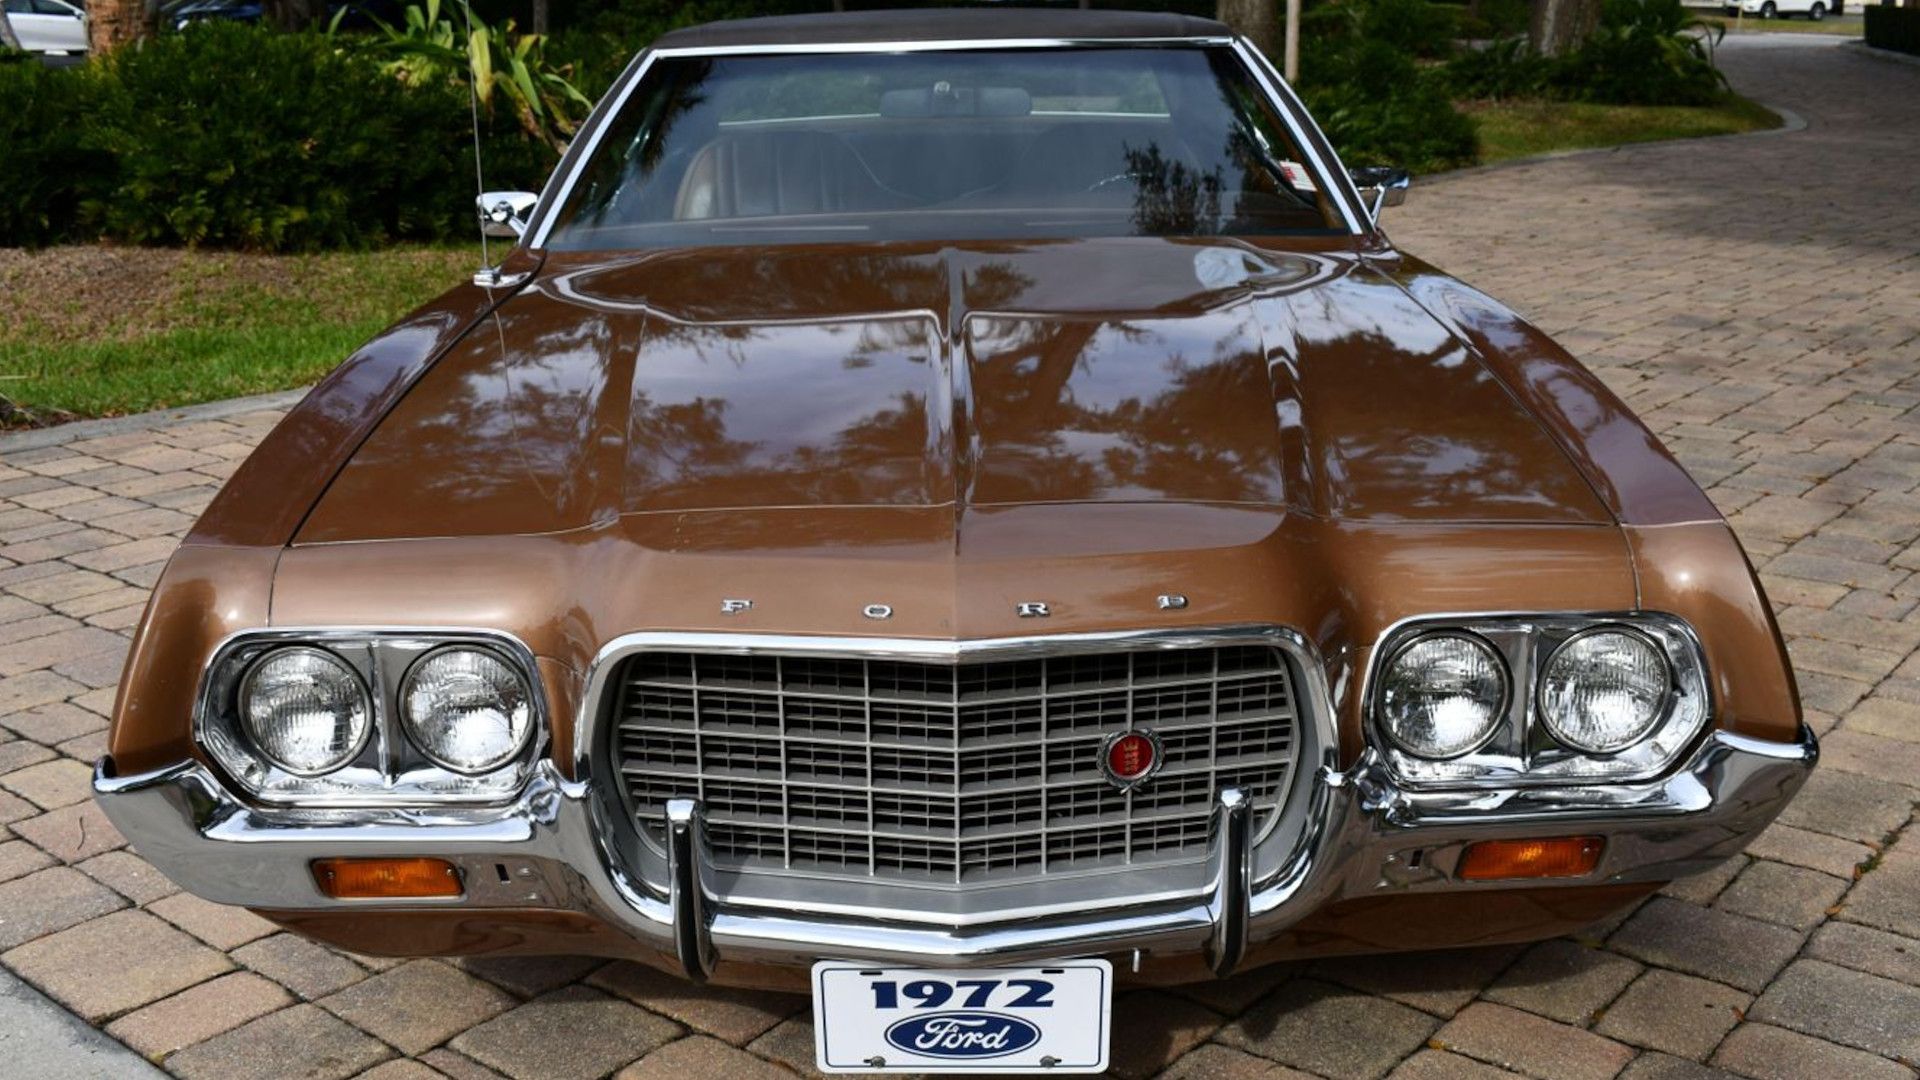 1972 Ford Gran Torino front